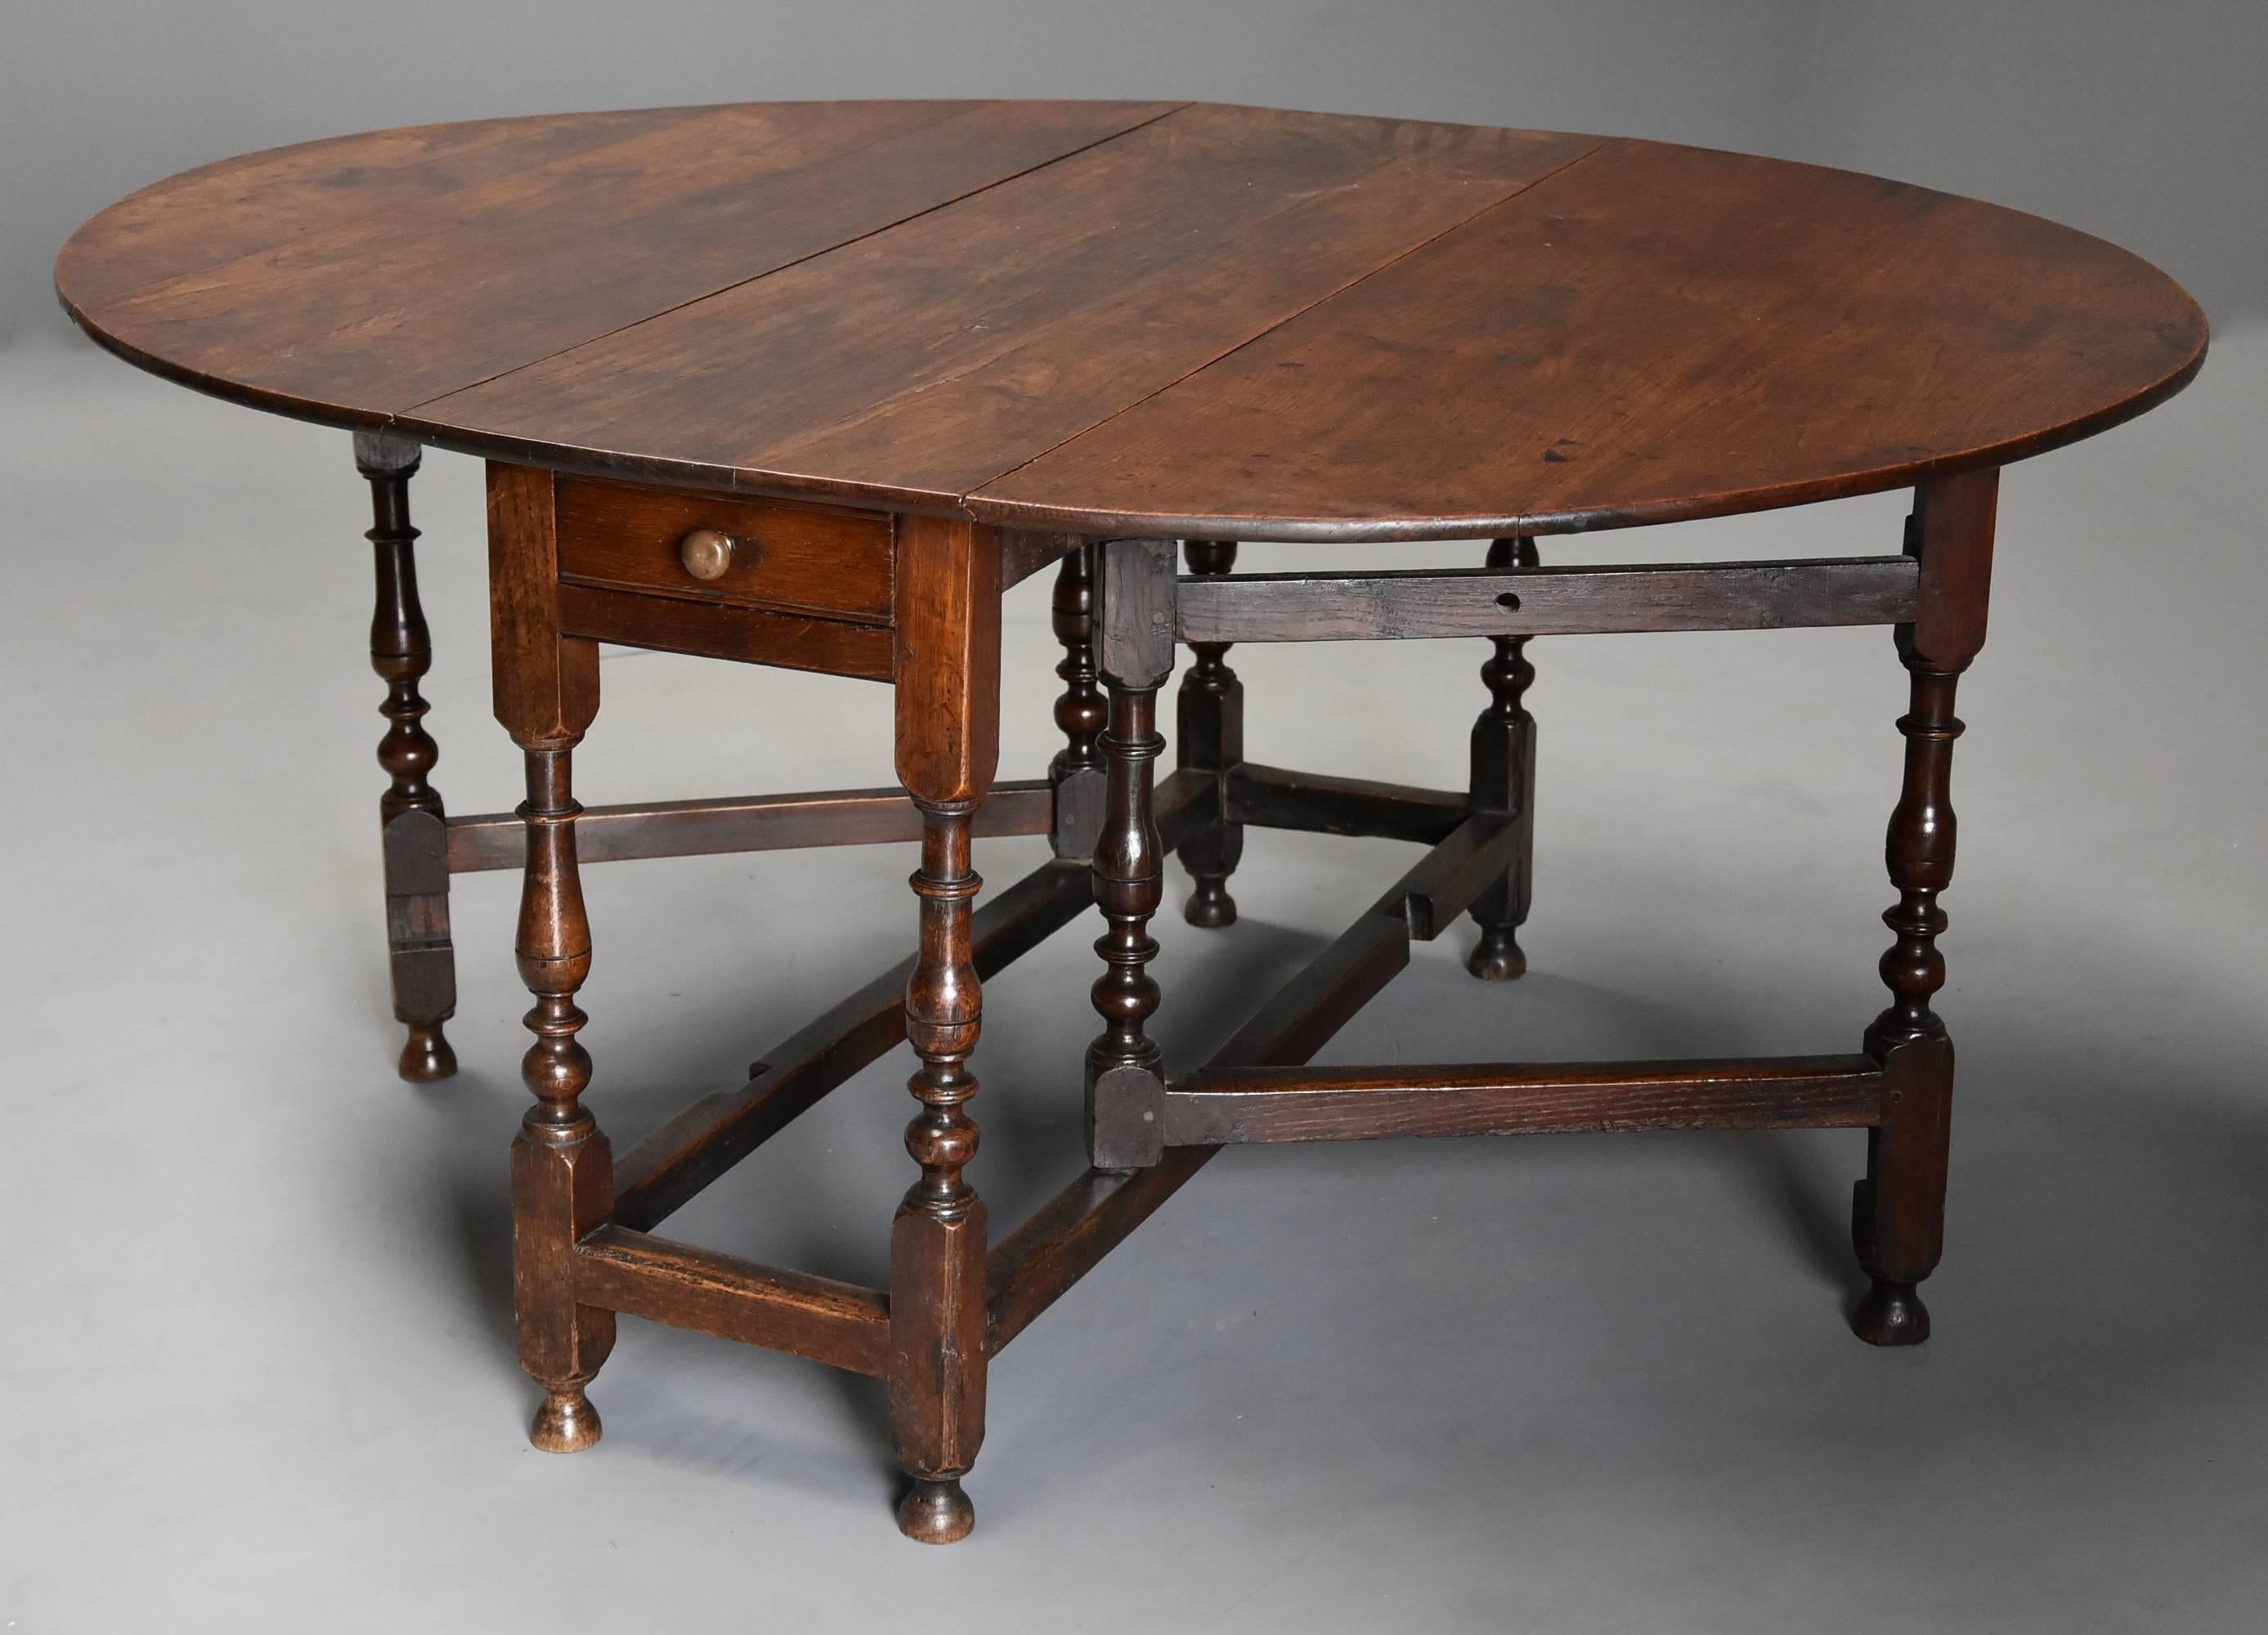 A late 17th century (circa 1700) oak gateleg table of good, versatile size with fine patina.

This table consists of a solid oak top with one drawer below (not original) and is supported by finely turned baluster legs.

This table is in